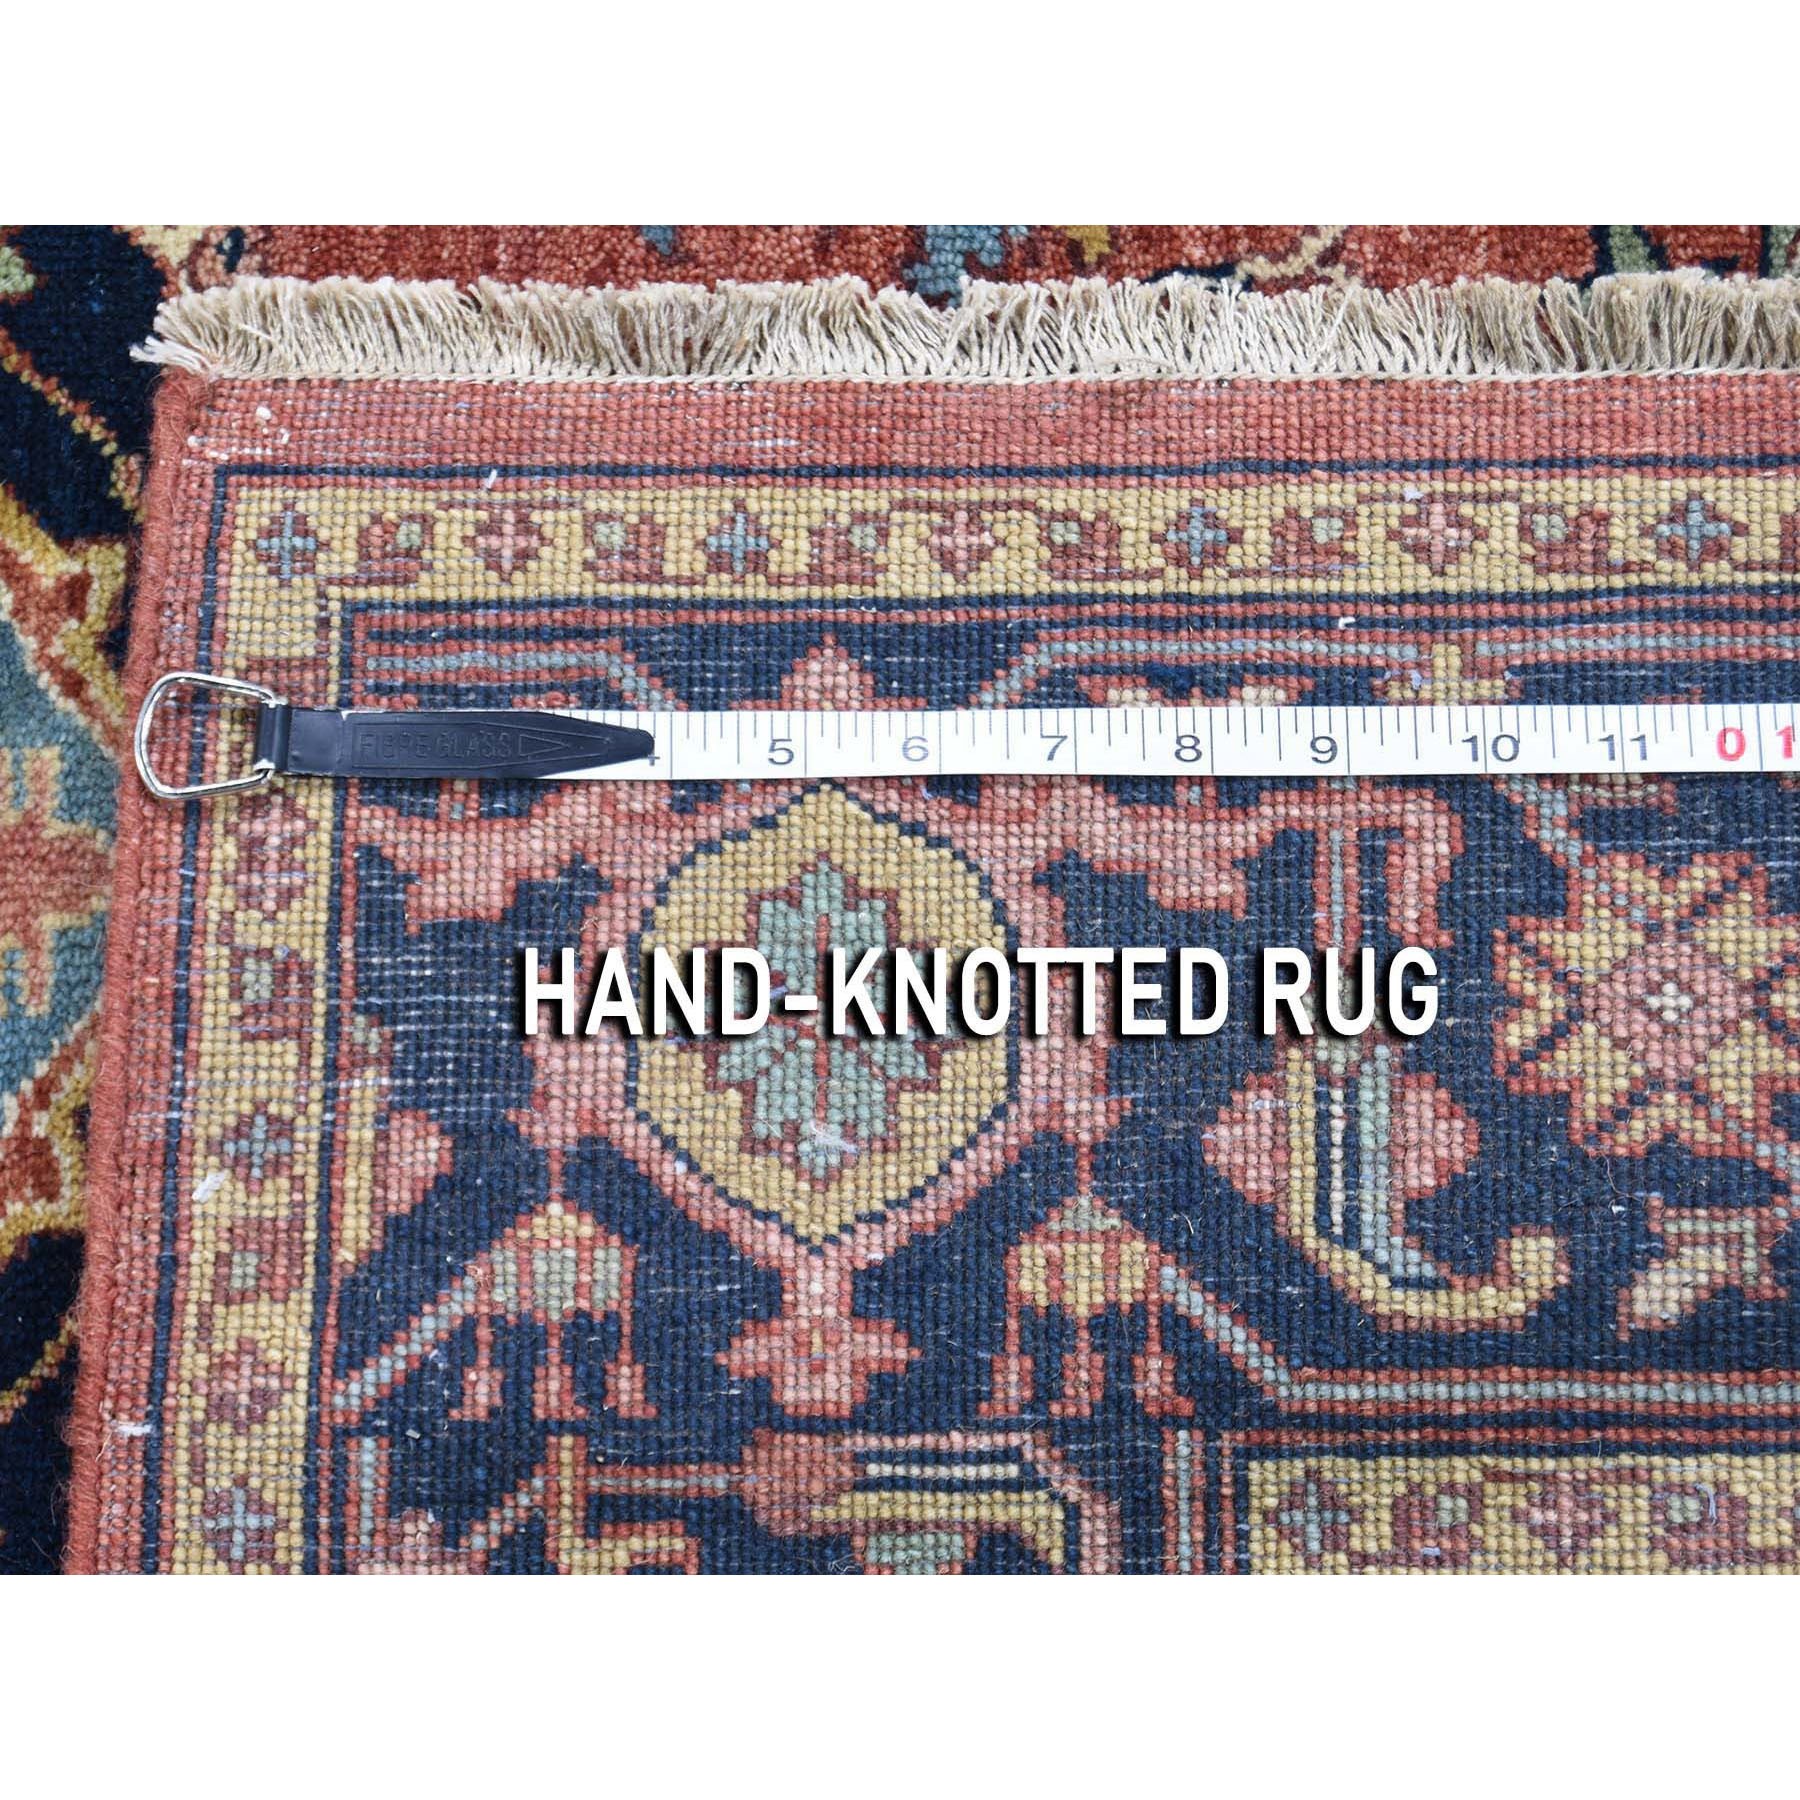 5-2 x7-2  Antiqued Heriz Re-creation Pure Wool Hand Knotted Oriental Rug 